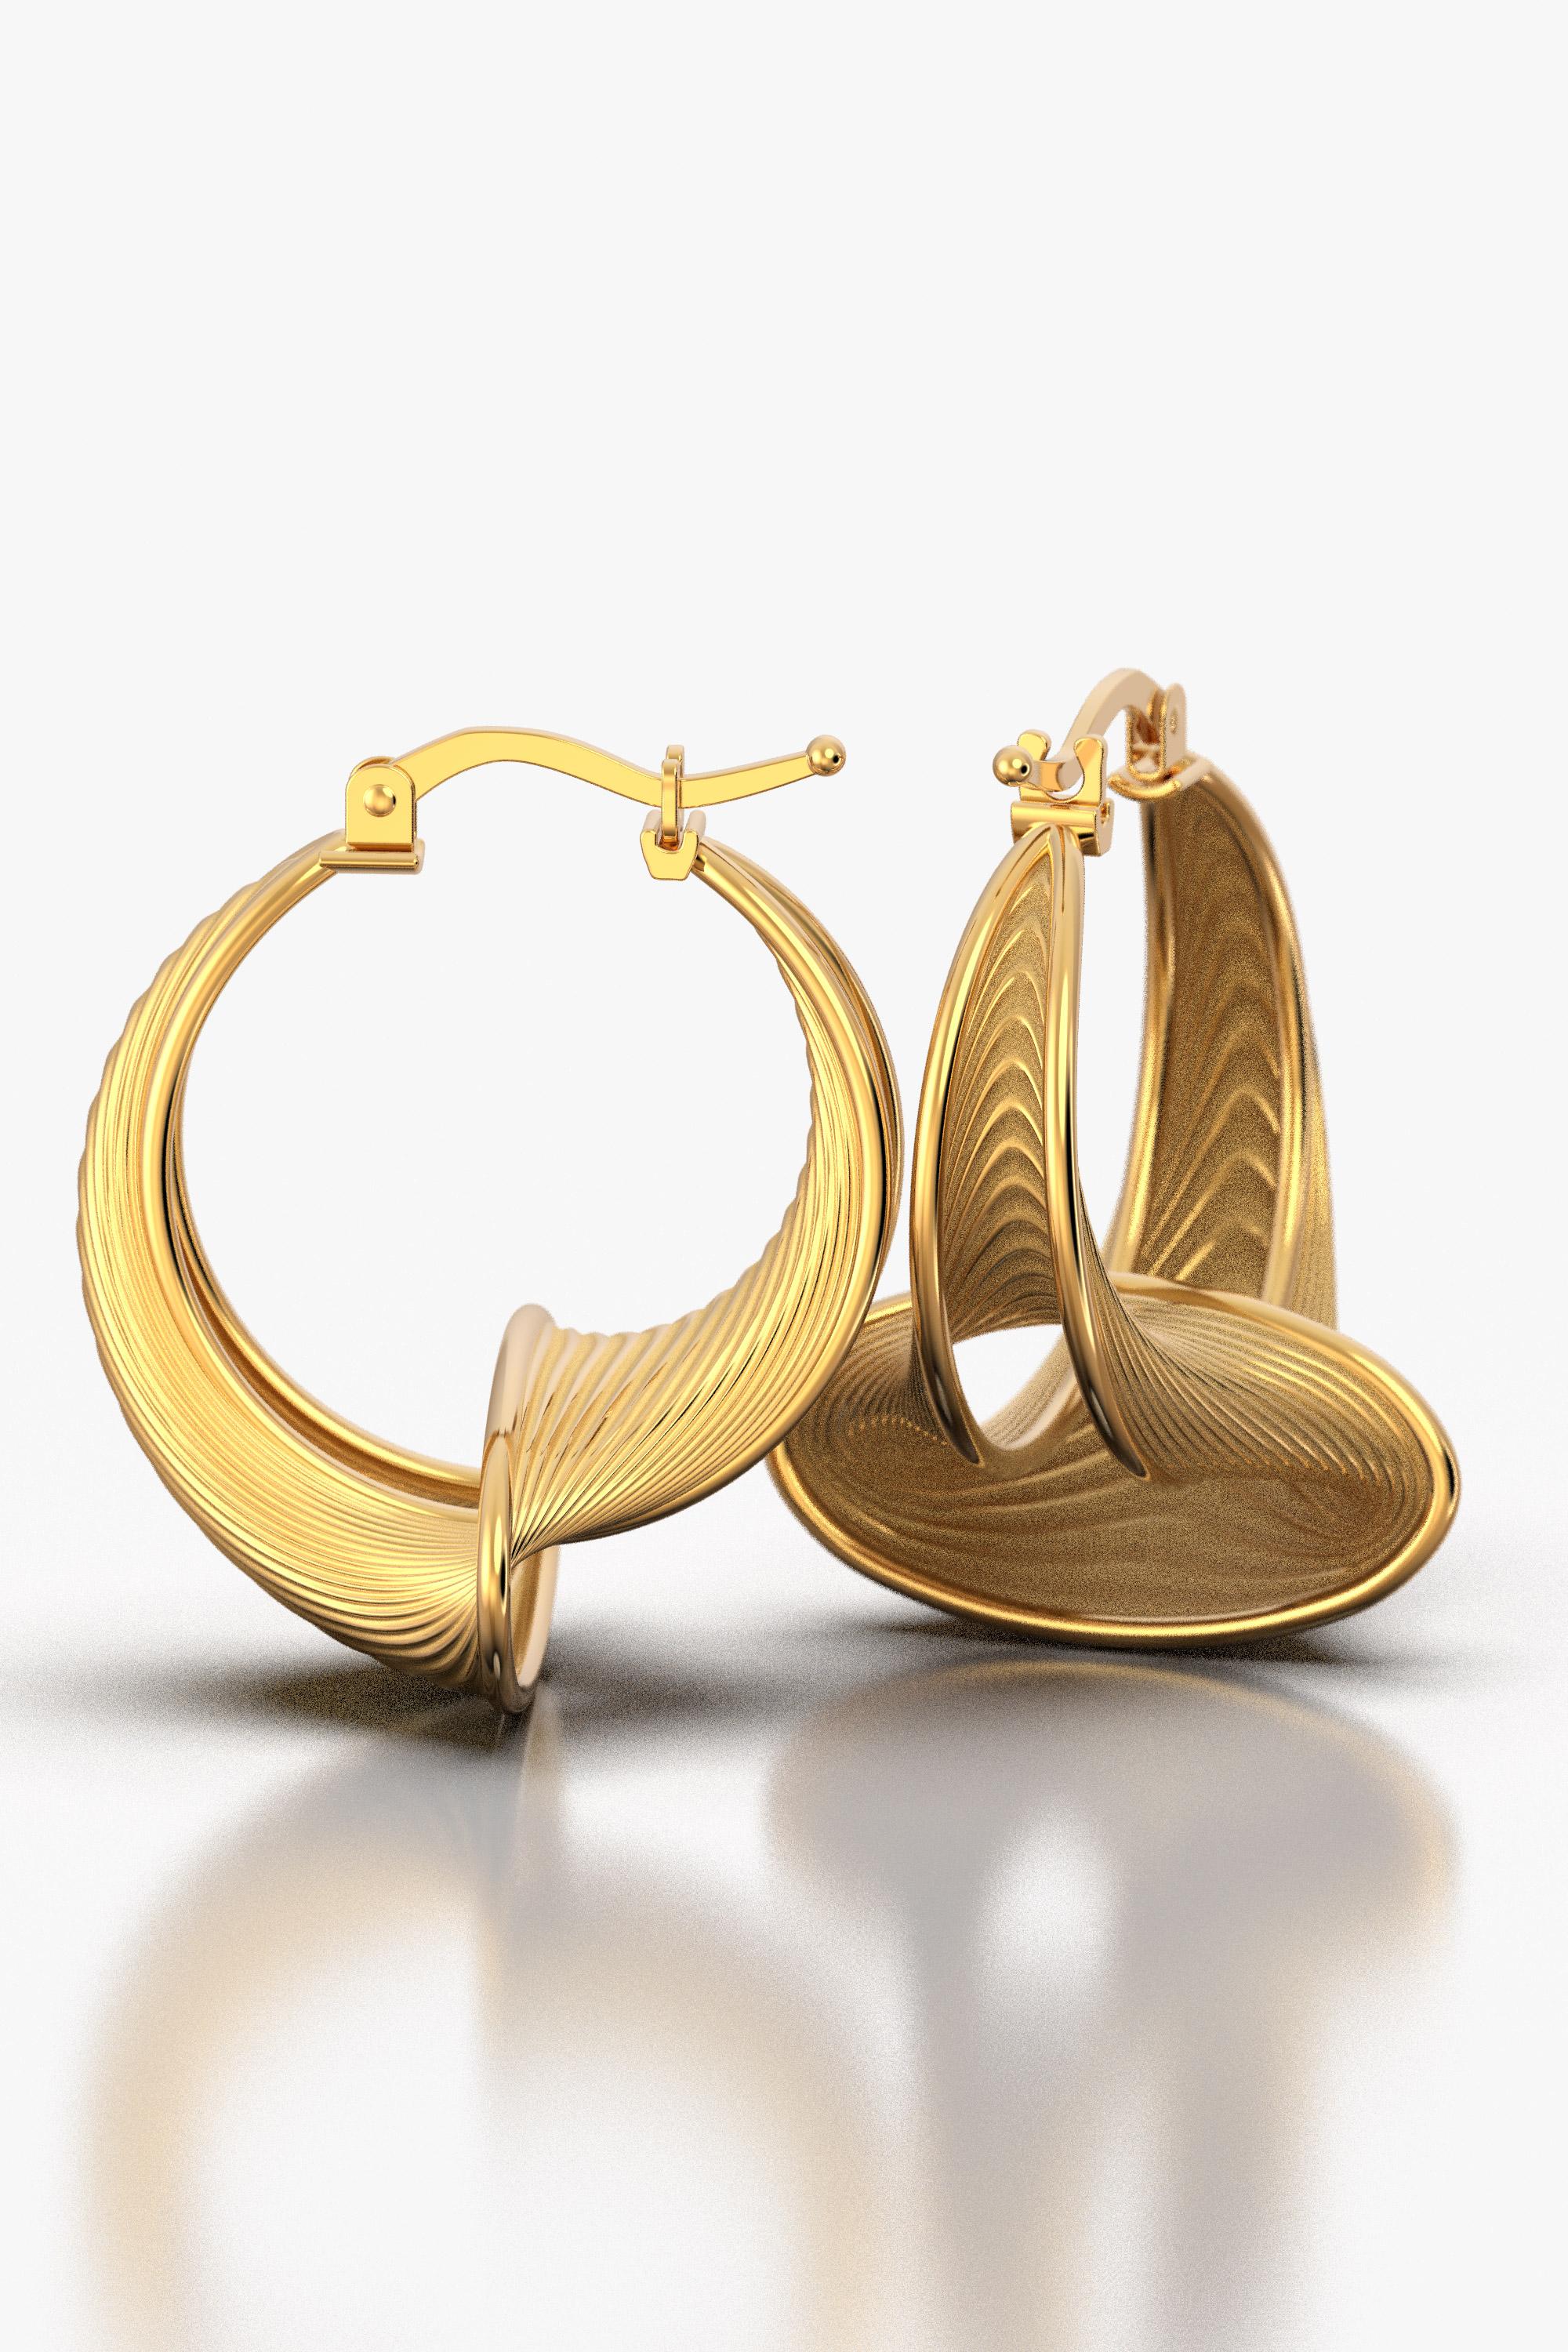 Women's Stunning Hoop Earrings Only Made to Order 14k Gold, Made in Italy by Oltremare  For Sale